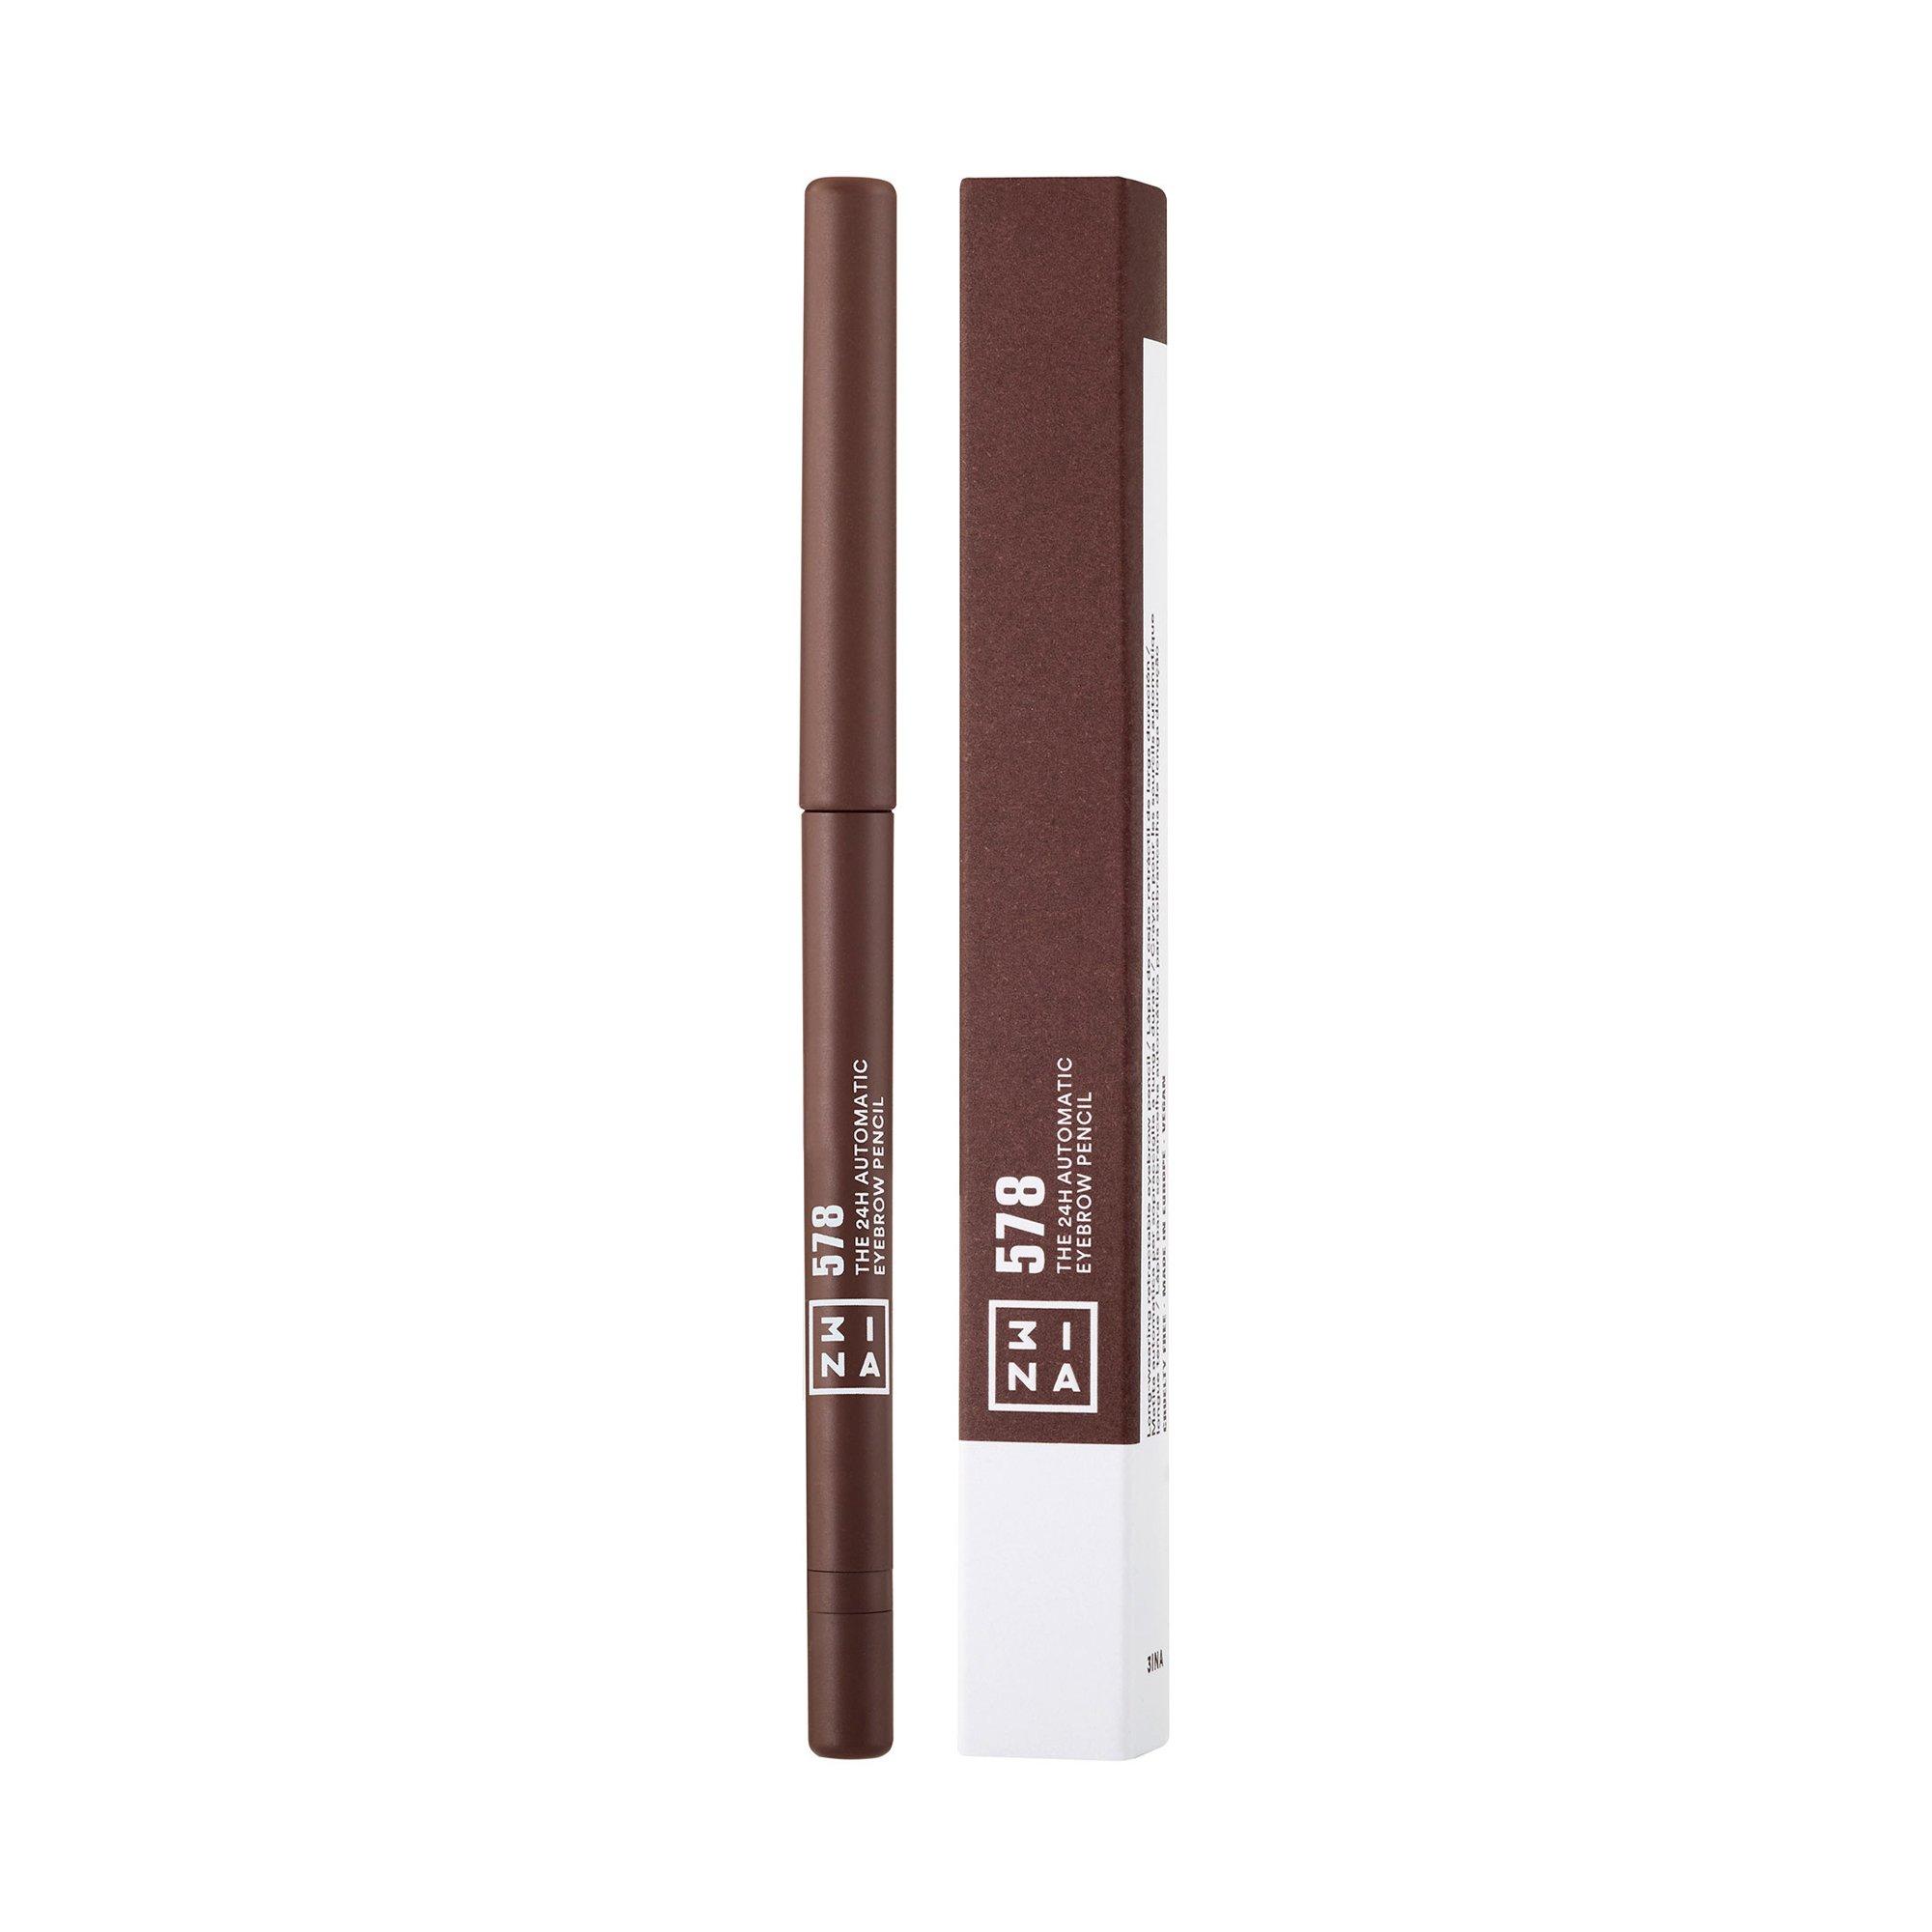 3INA The 24H Automatic Eyebrow Pencil The Automatic Eyebrow Pencil 